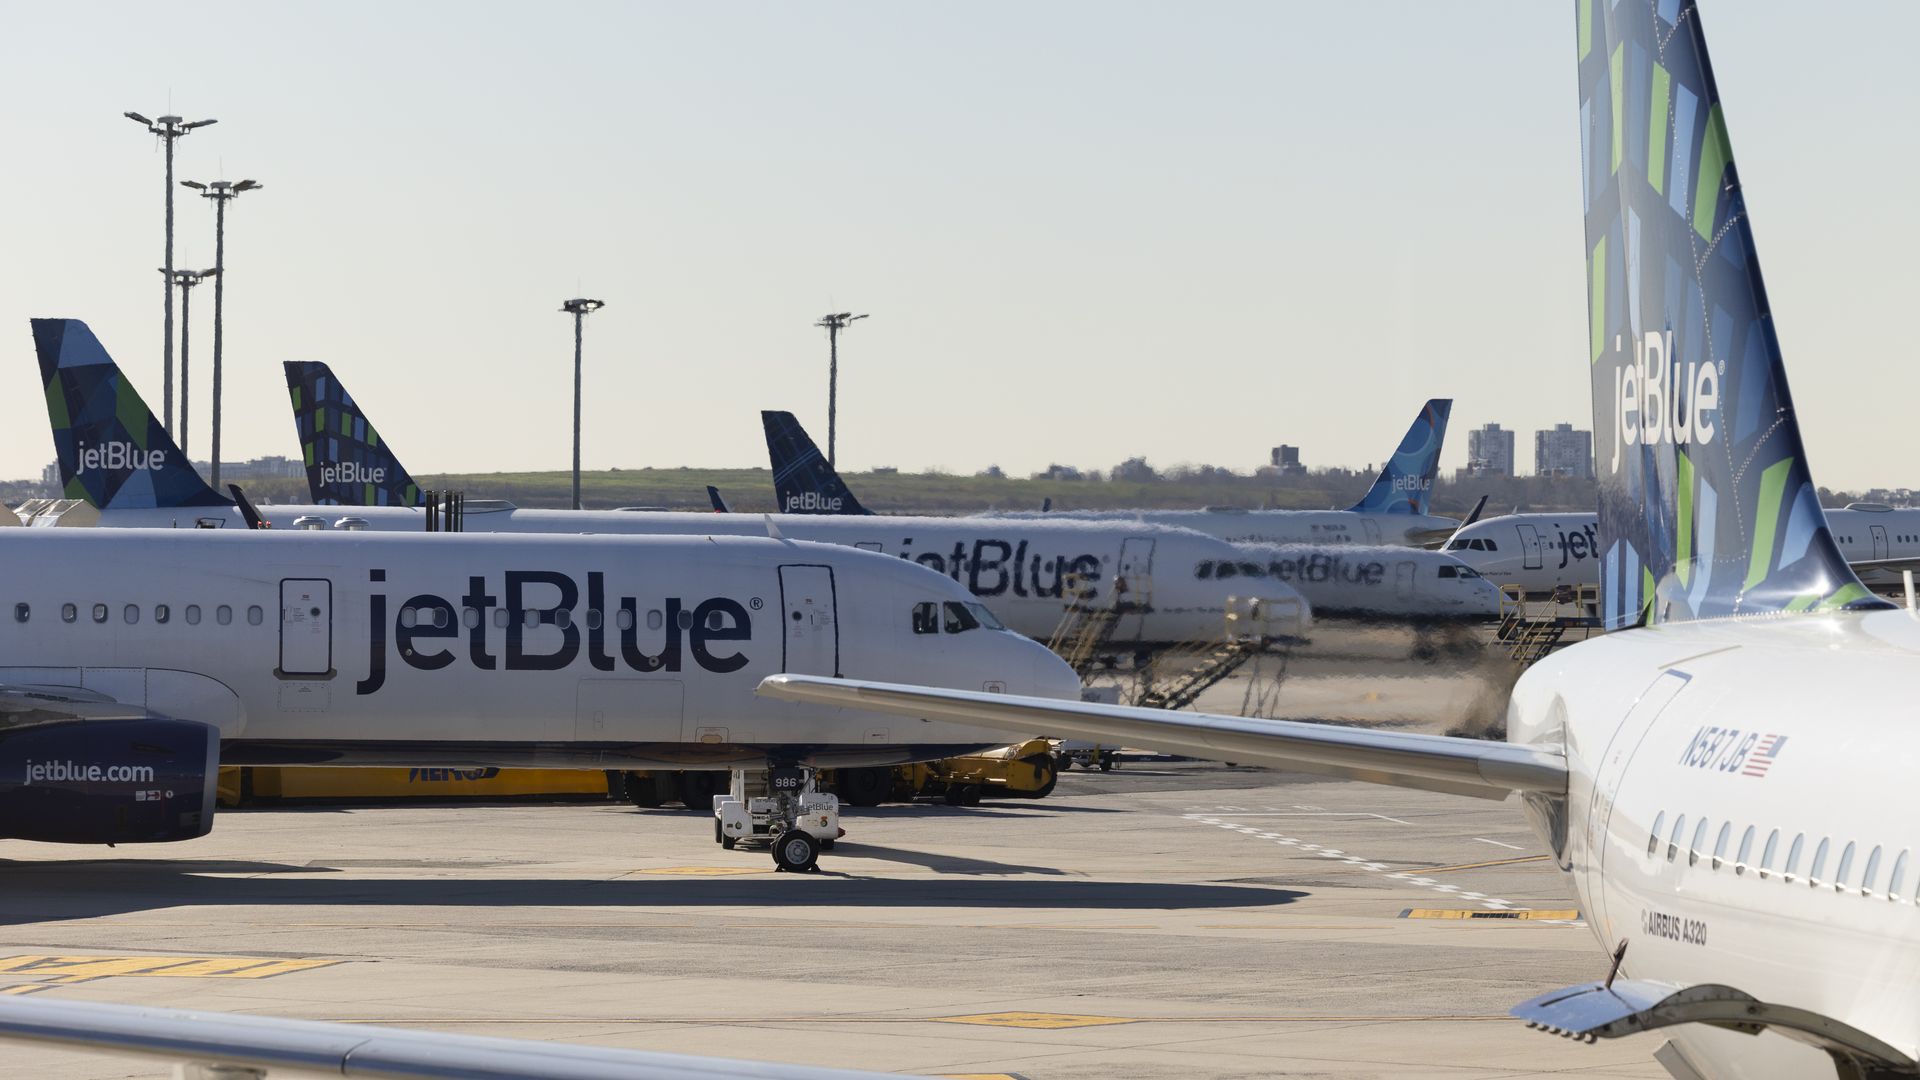 JetBlue aircrafts at John F. Kennedy International Airport in New York in November 2021.